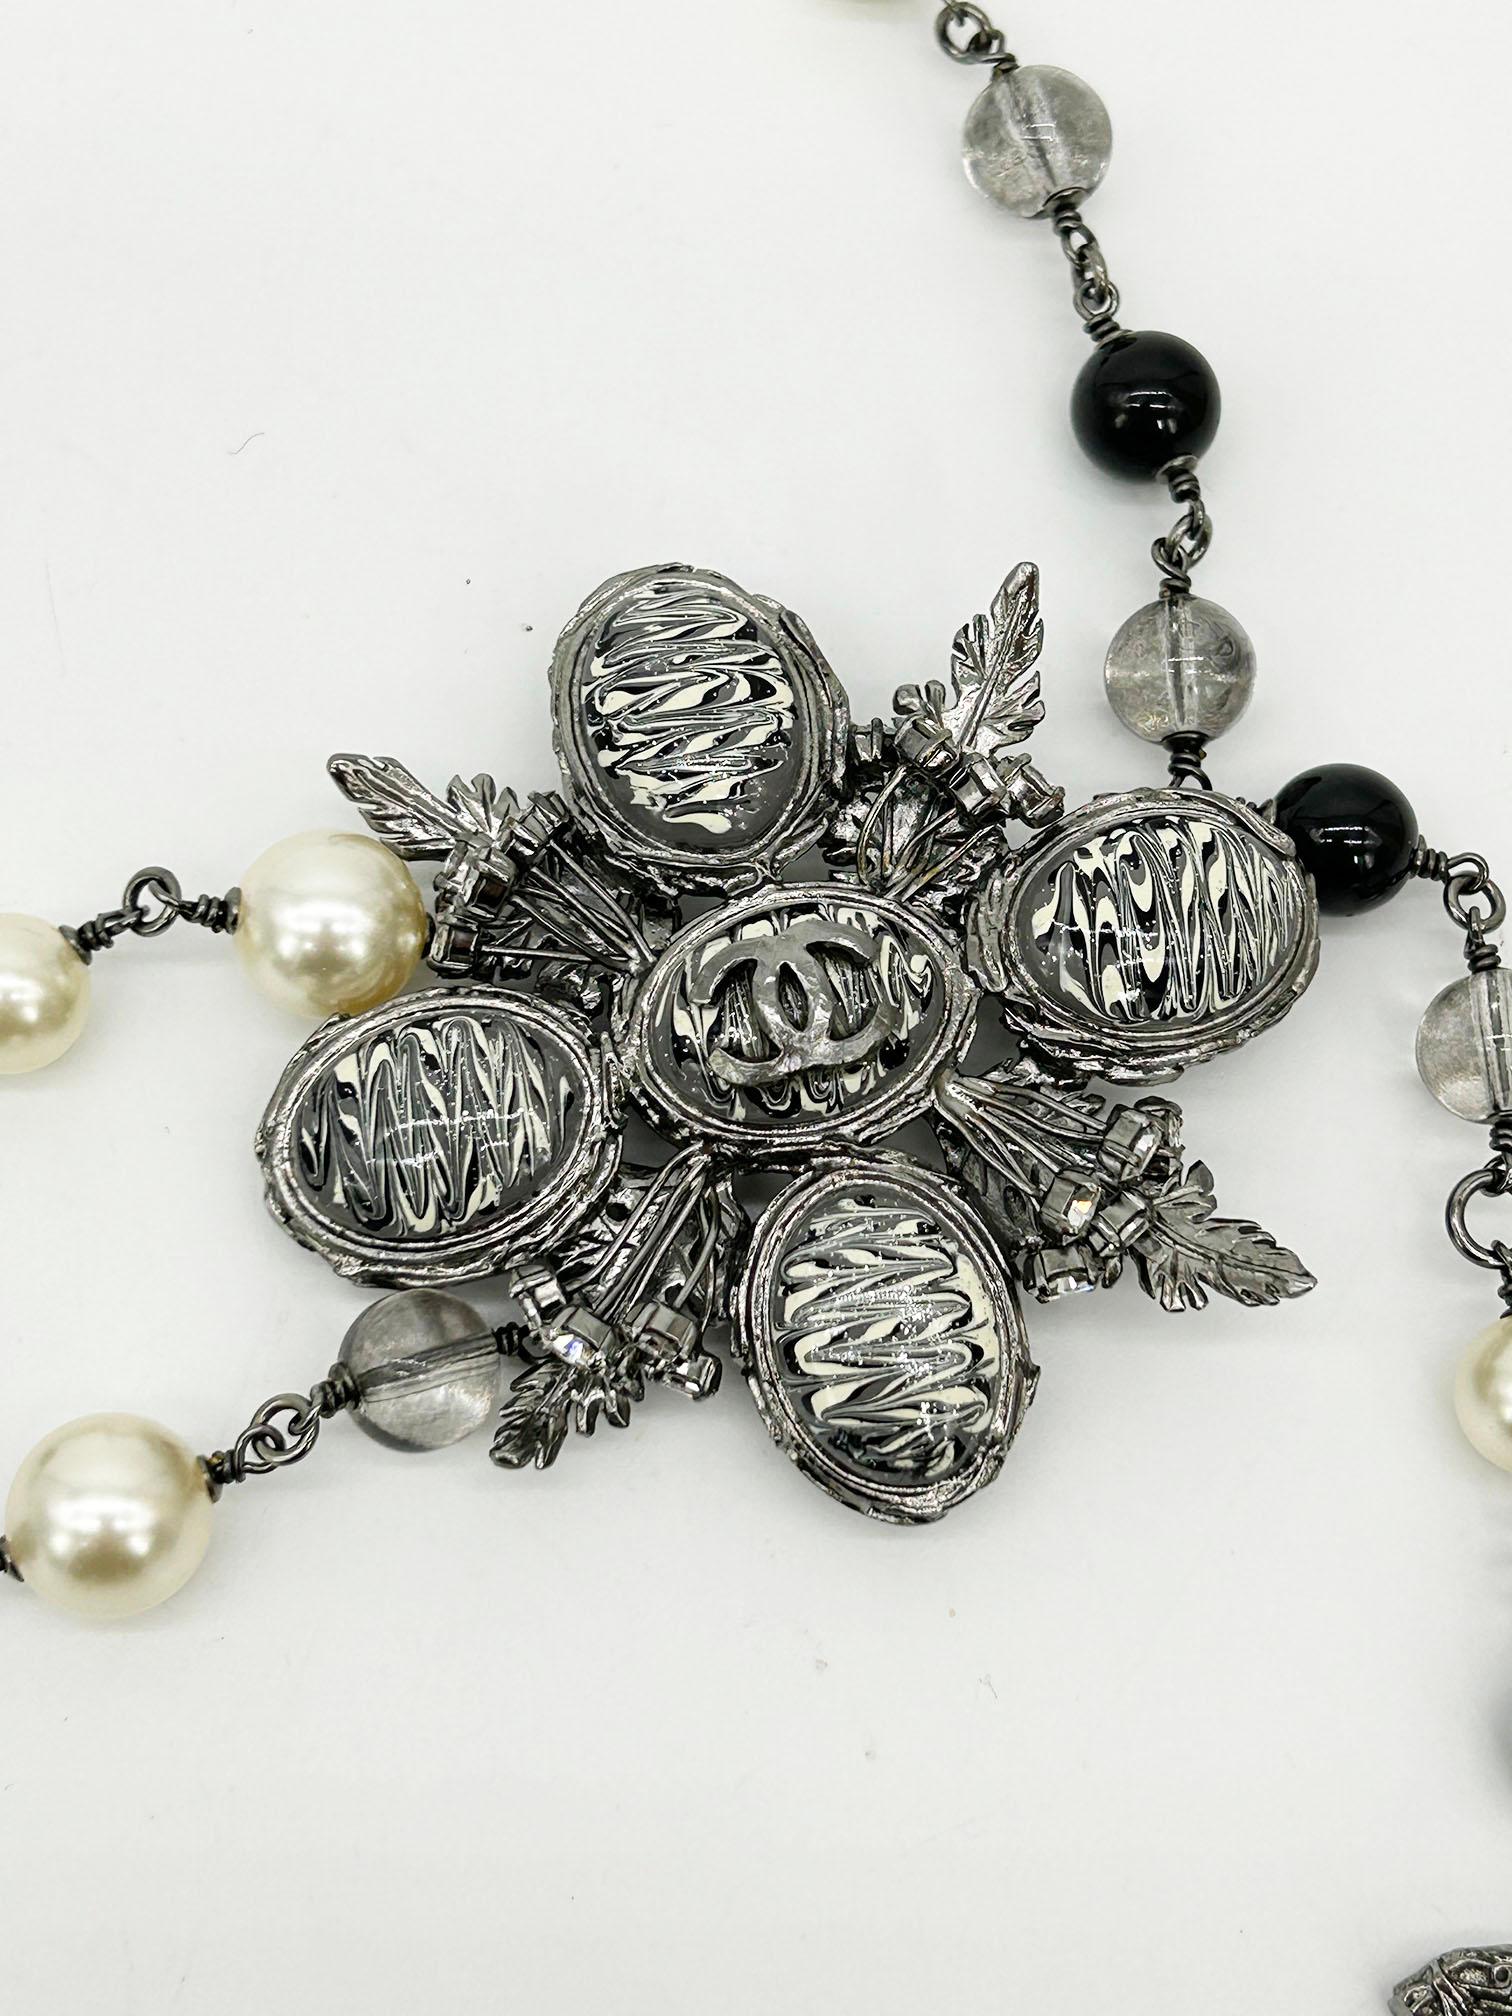 Chanel Beaded Marble Flower Belt Necklace in excellent condition. Black, gray, pearl and metal beads with gunmetal chain. gray, black and white glitter marble flower emblem with gunmetal hardware, rhinestones and CC logo in center. CC logo charm on